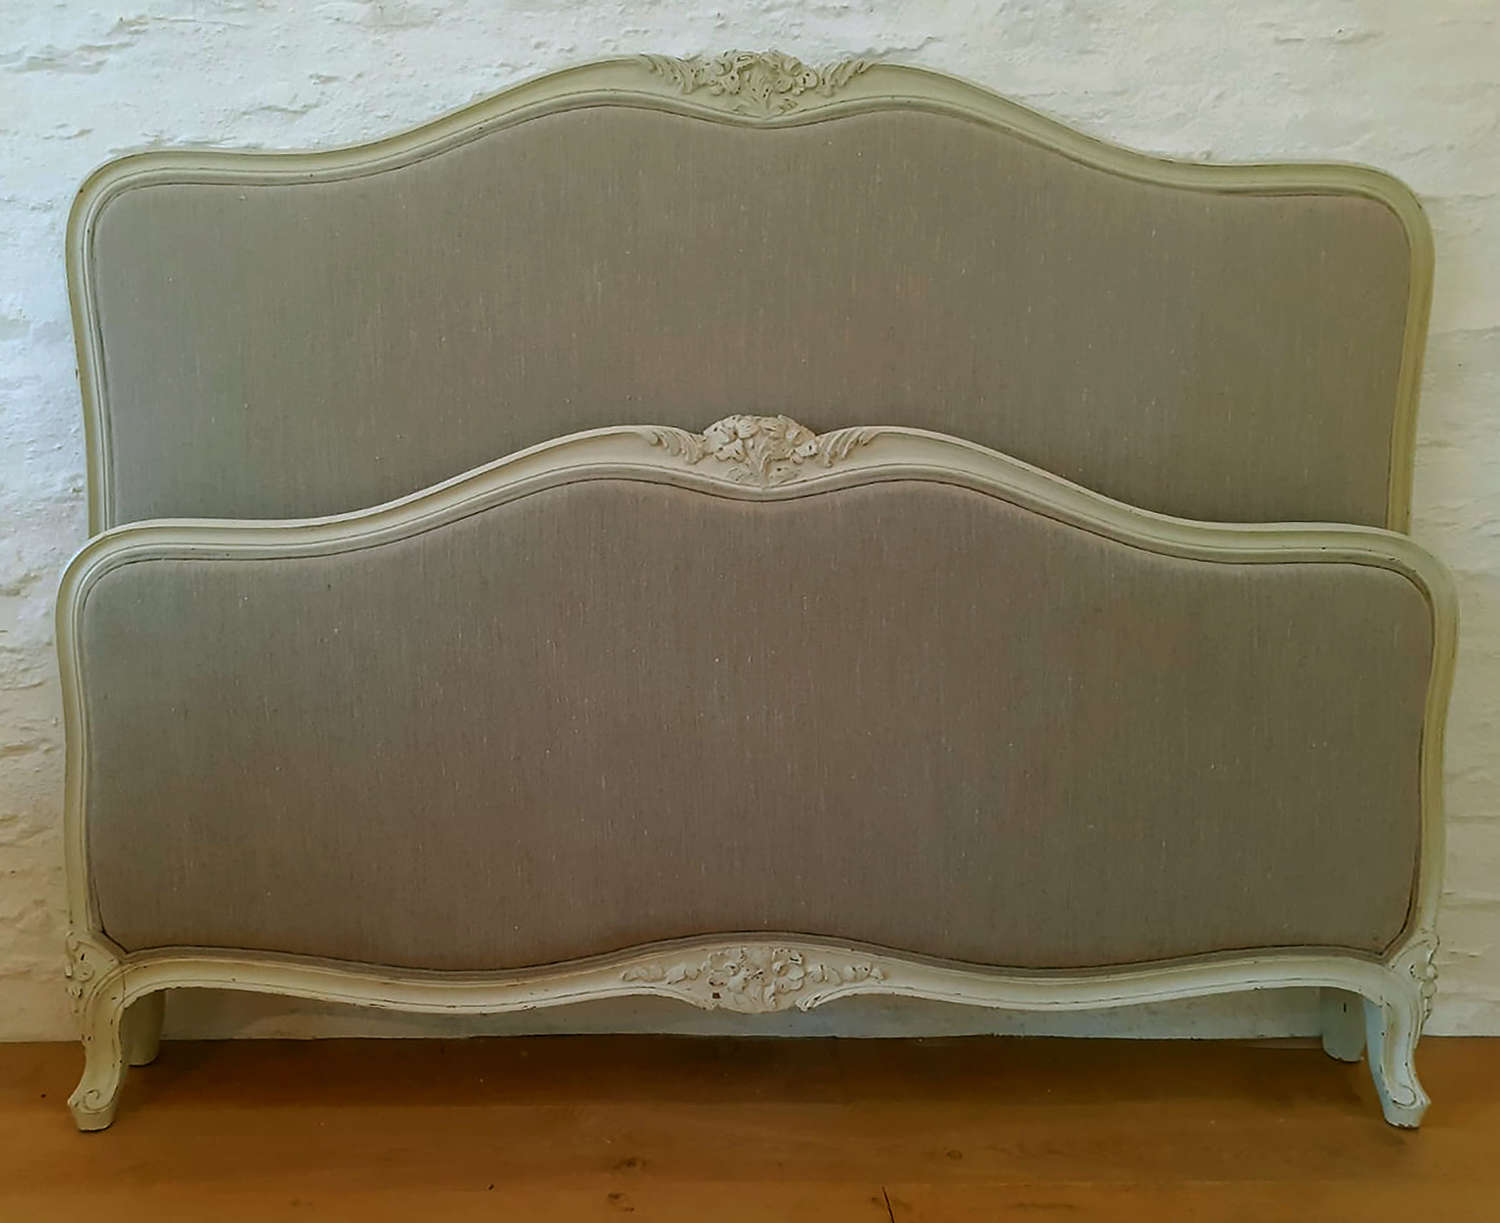 King size Louis XV style upholstered bedstead